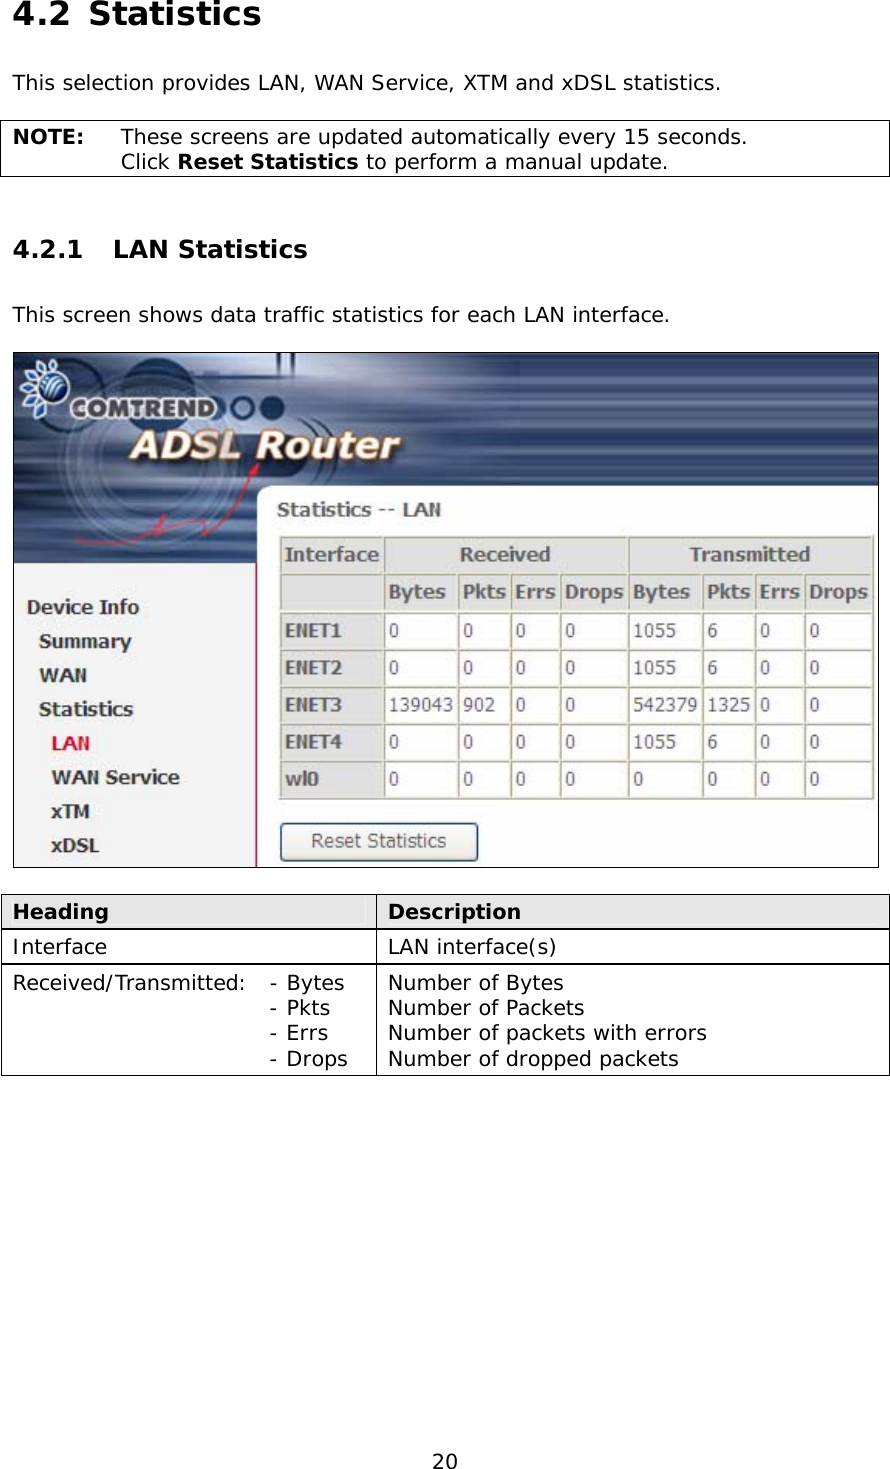  20 4.2 Statistics This selection provides LAN, WAN Service, XTM and xDSL statistics.  NOTE:  These screens are updated automatically every 15 seconds.  Click Reset Statistics to perform a manual update. 4.2.1 LAN Statistics This screen shows data traffic statistics for each LAN interface.    Heading  Description Interface  LAN interface(s) Received/Transmitted: - Bytes  - Pkts  - Errs  - Drops Number of Bytes  Number of Packets  Number of packets with errors Number of dropped packets   